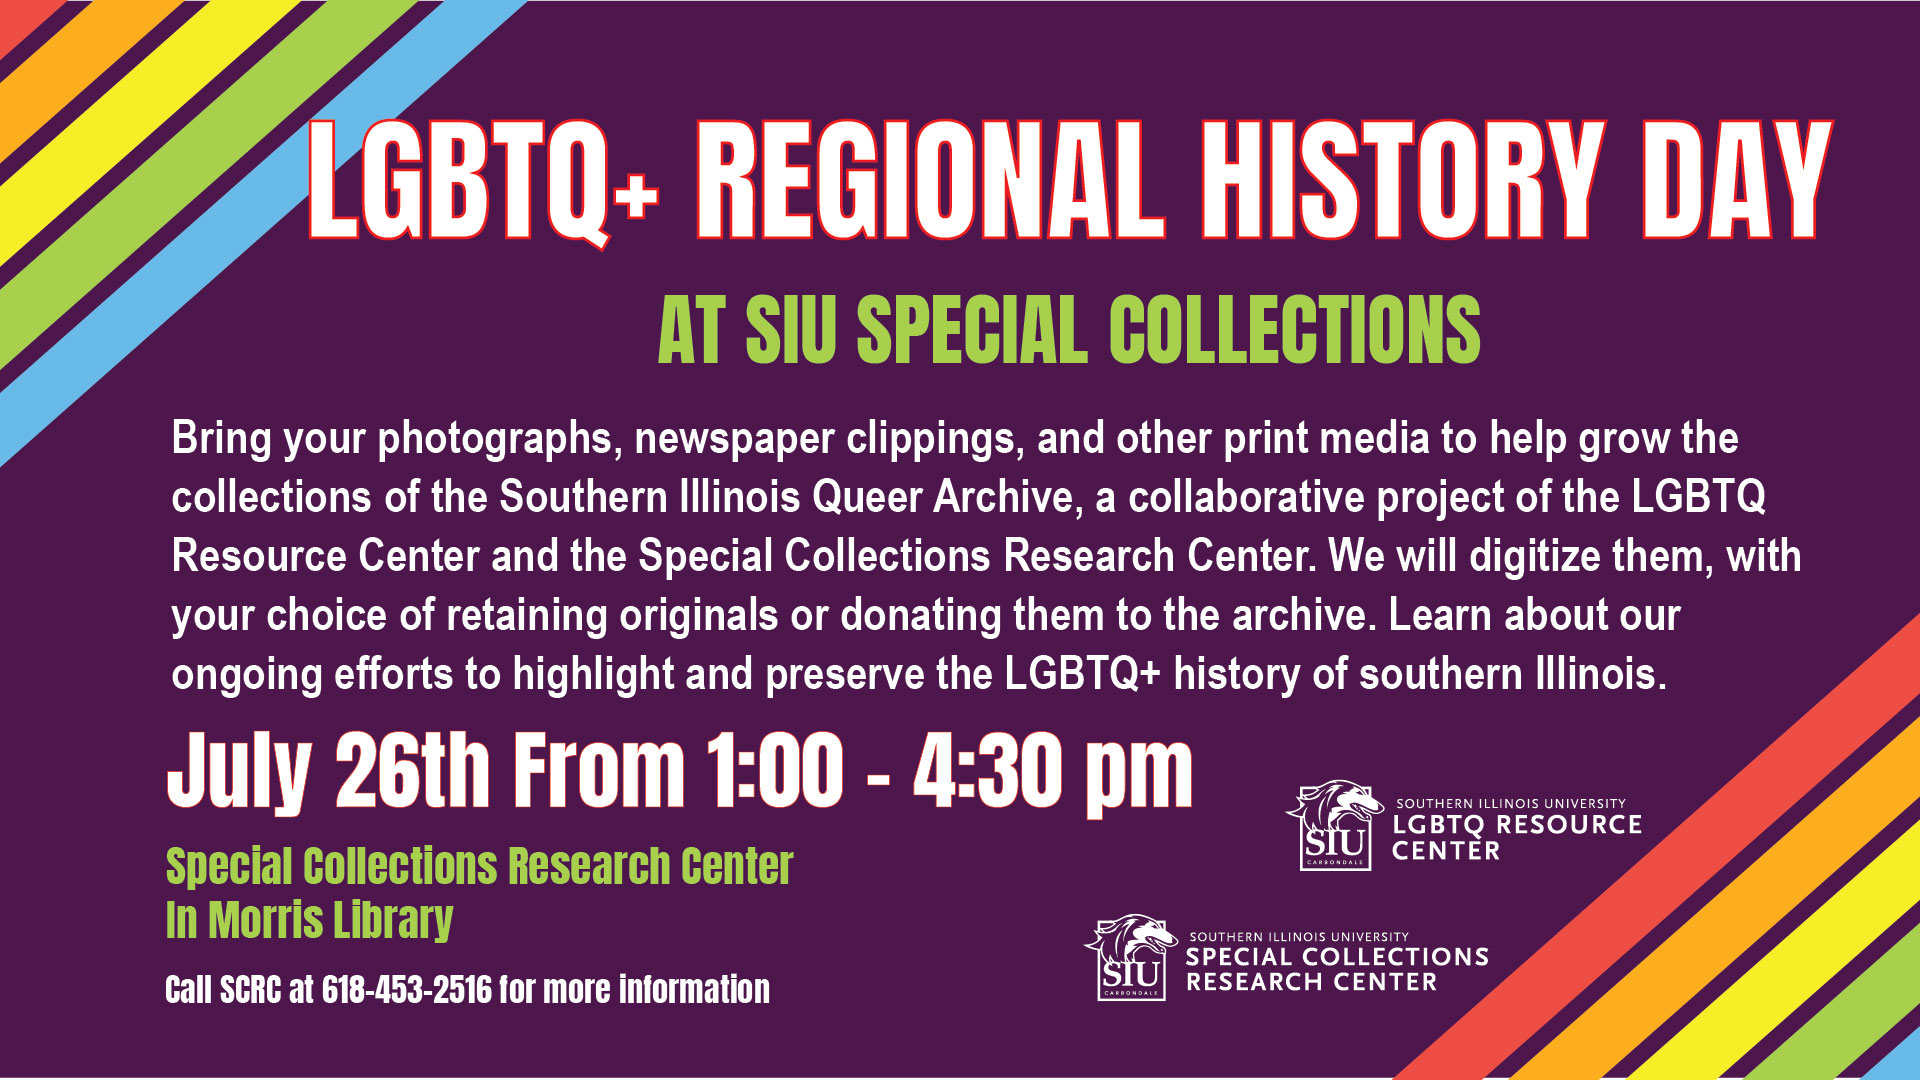 Celebrate LGBTQ+ Regional History Day on July 26 by bring your photographs, newspaper clippings, and other print media to help grow the collections of the Southern Illinois Queer Archive, a collaborative project of the LGBTQ Resource Center and the Special Collections Research Center. SCRC staff will digitize them, with your choice of retaining the originals or donating them to the archive. While you're there, learn more about our ongoing efforts to highlight and preserve the LGBTQ+ history of southern Illinois. The event runs from 1-4:30pm on Friday, July 26, 2024. Please contact the Special Collections Research Center for more information at 618-453-2516.